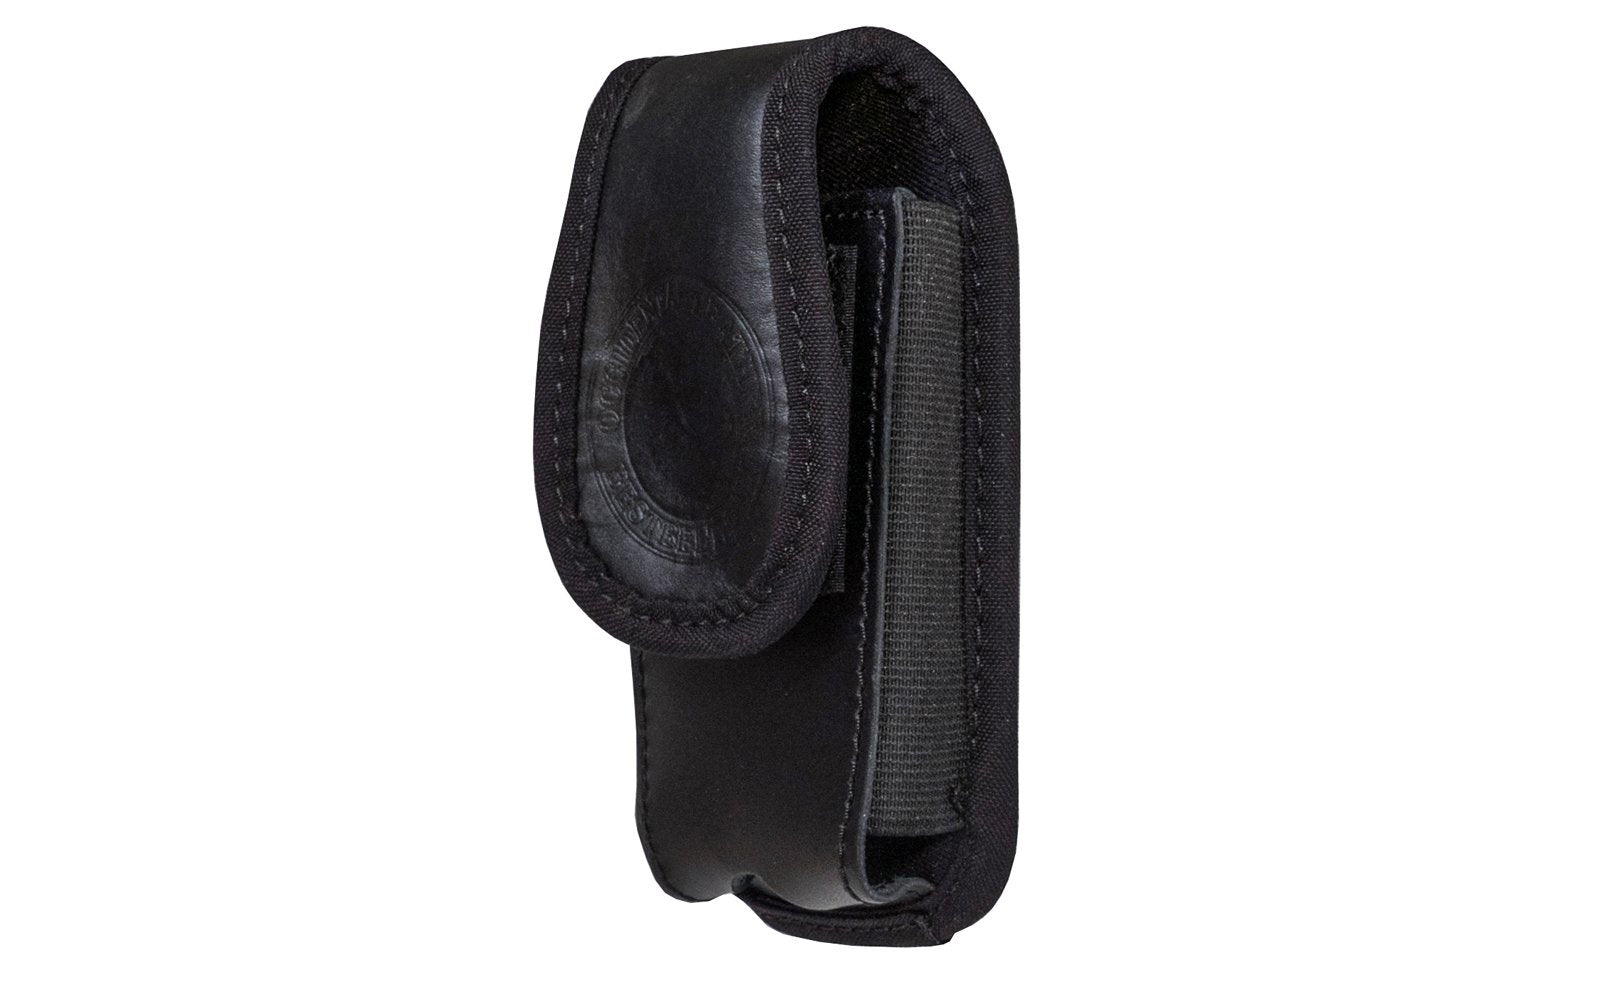 Occidental Expandable Clip-On Phone Holster ~ 8574 - Made in USA - Hand Made ~ A leather holster with heavy duty elastic sides that firmly holds your cell phone - Fits iPhone 6, 7, 8, & X models - Also fits Galaxy S6, S7, S9 (not Plus models) - Expands out - Fits many smart phones - 2" spring steel belt